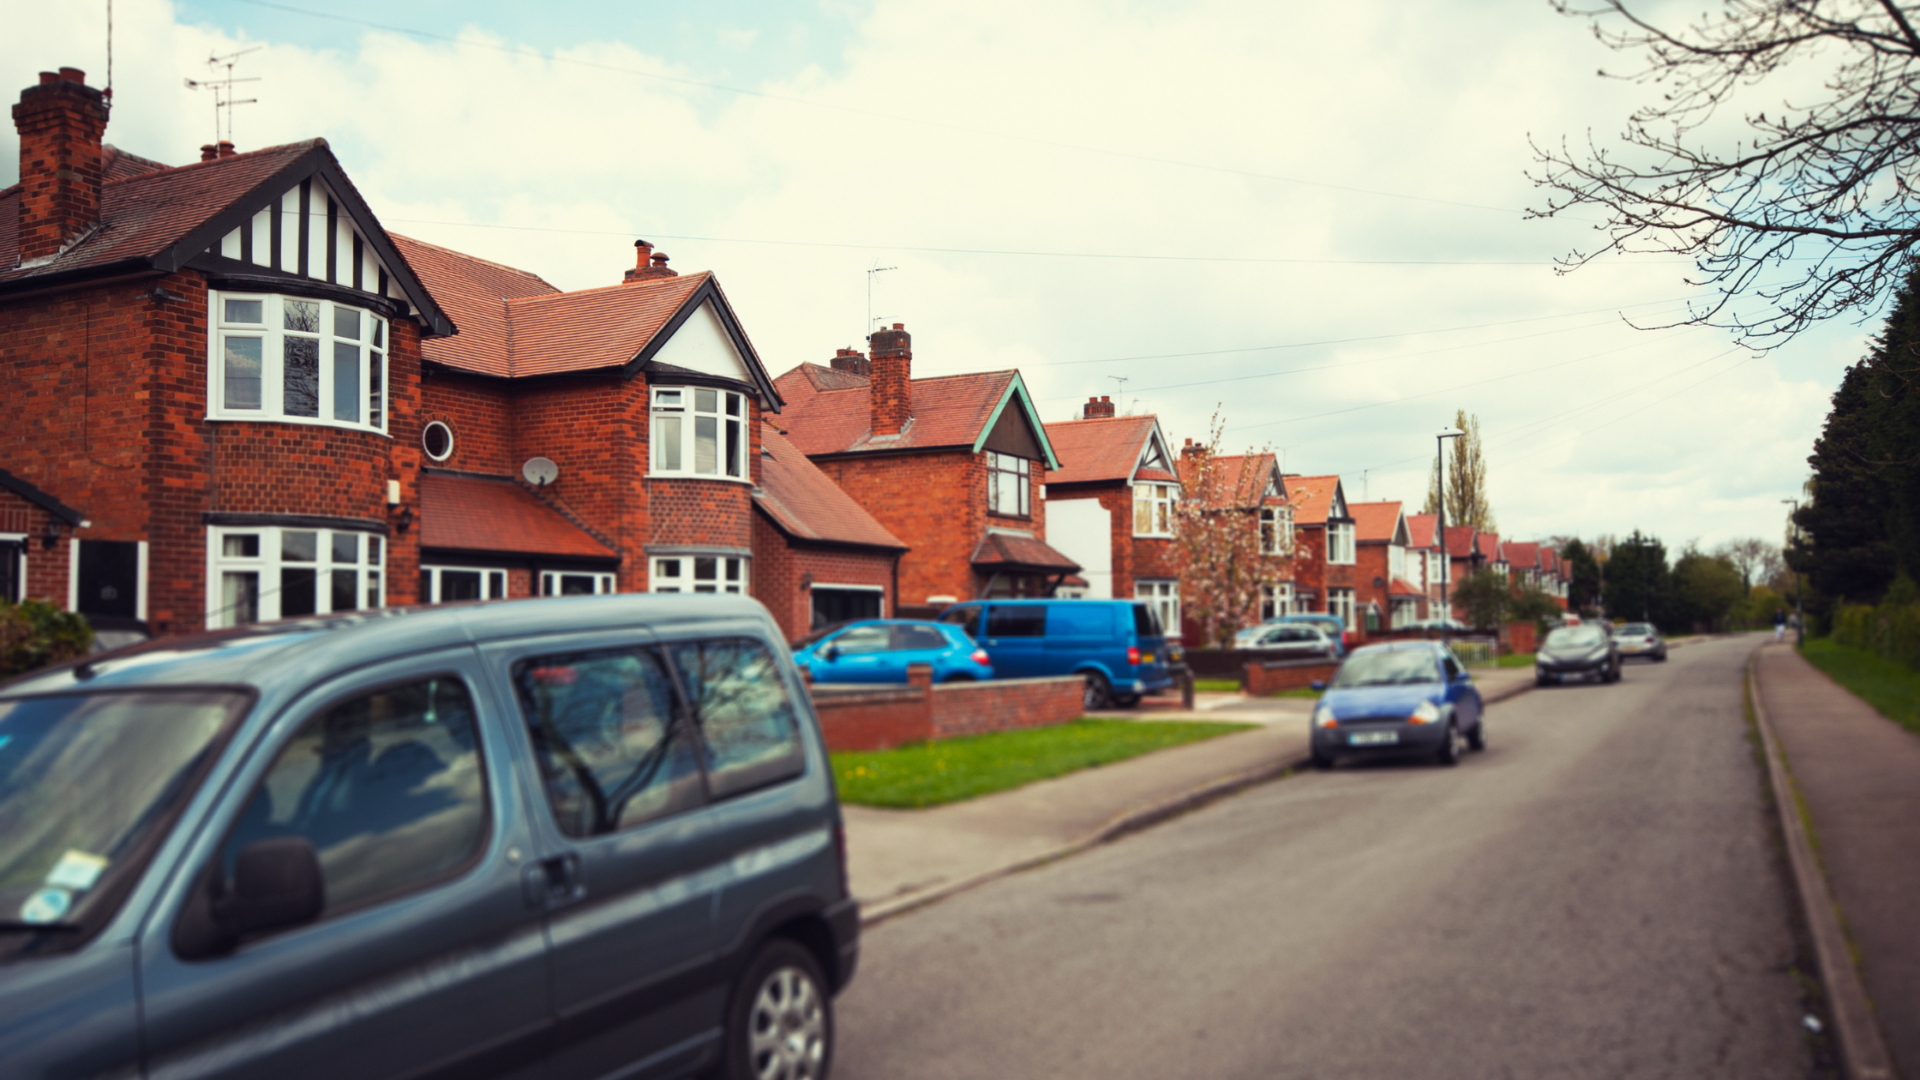 UK suburb with cars